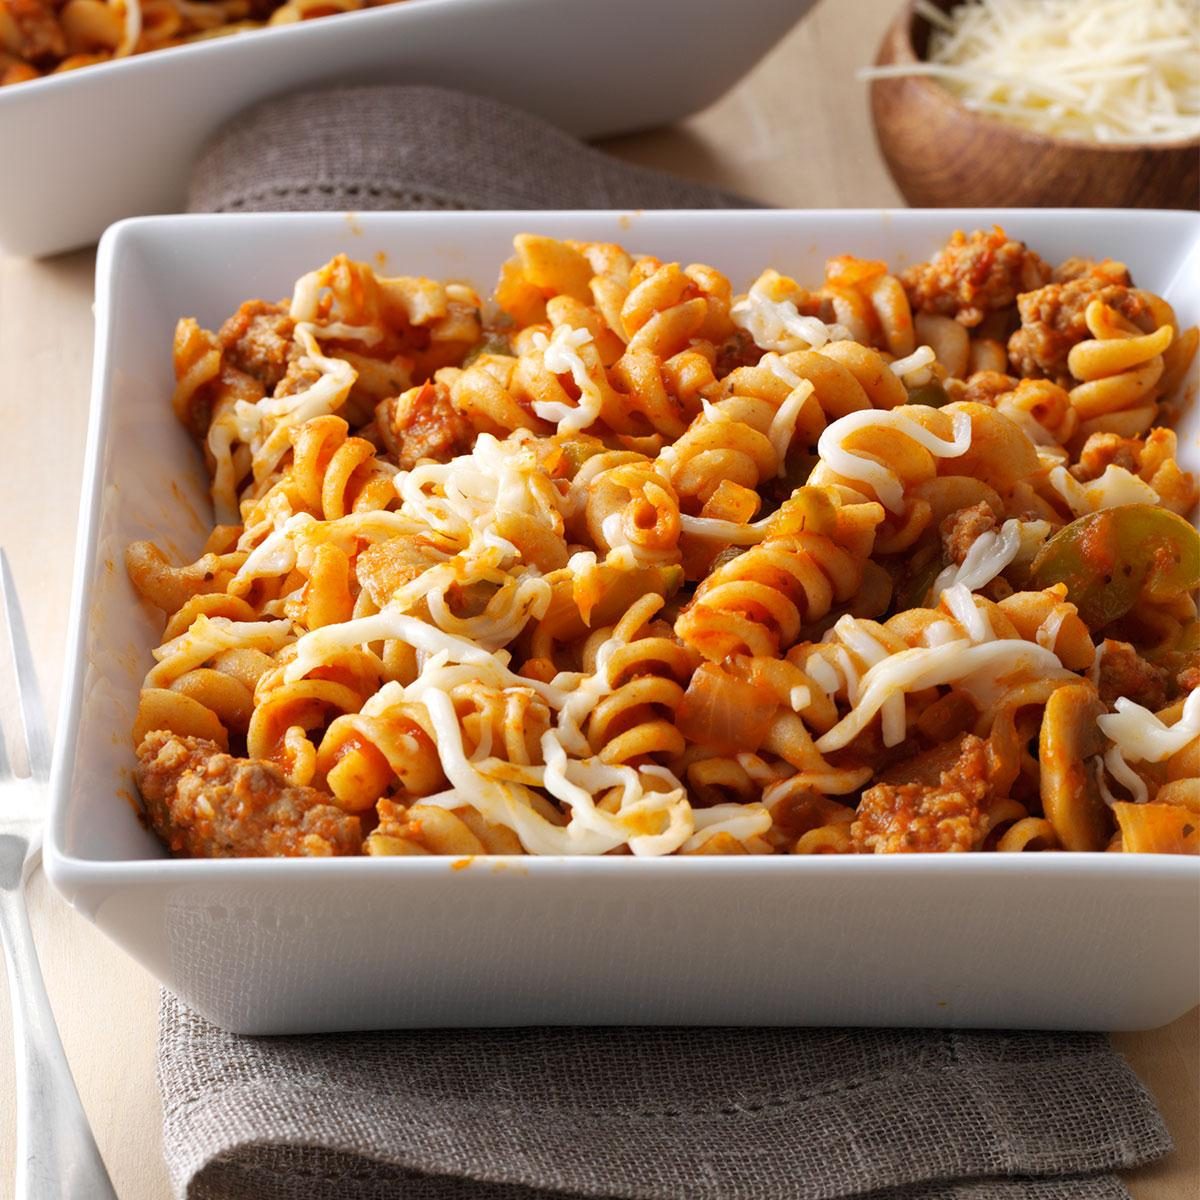 Sausage Pizza Pasta Recipe: How to Make It